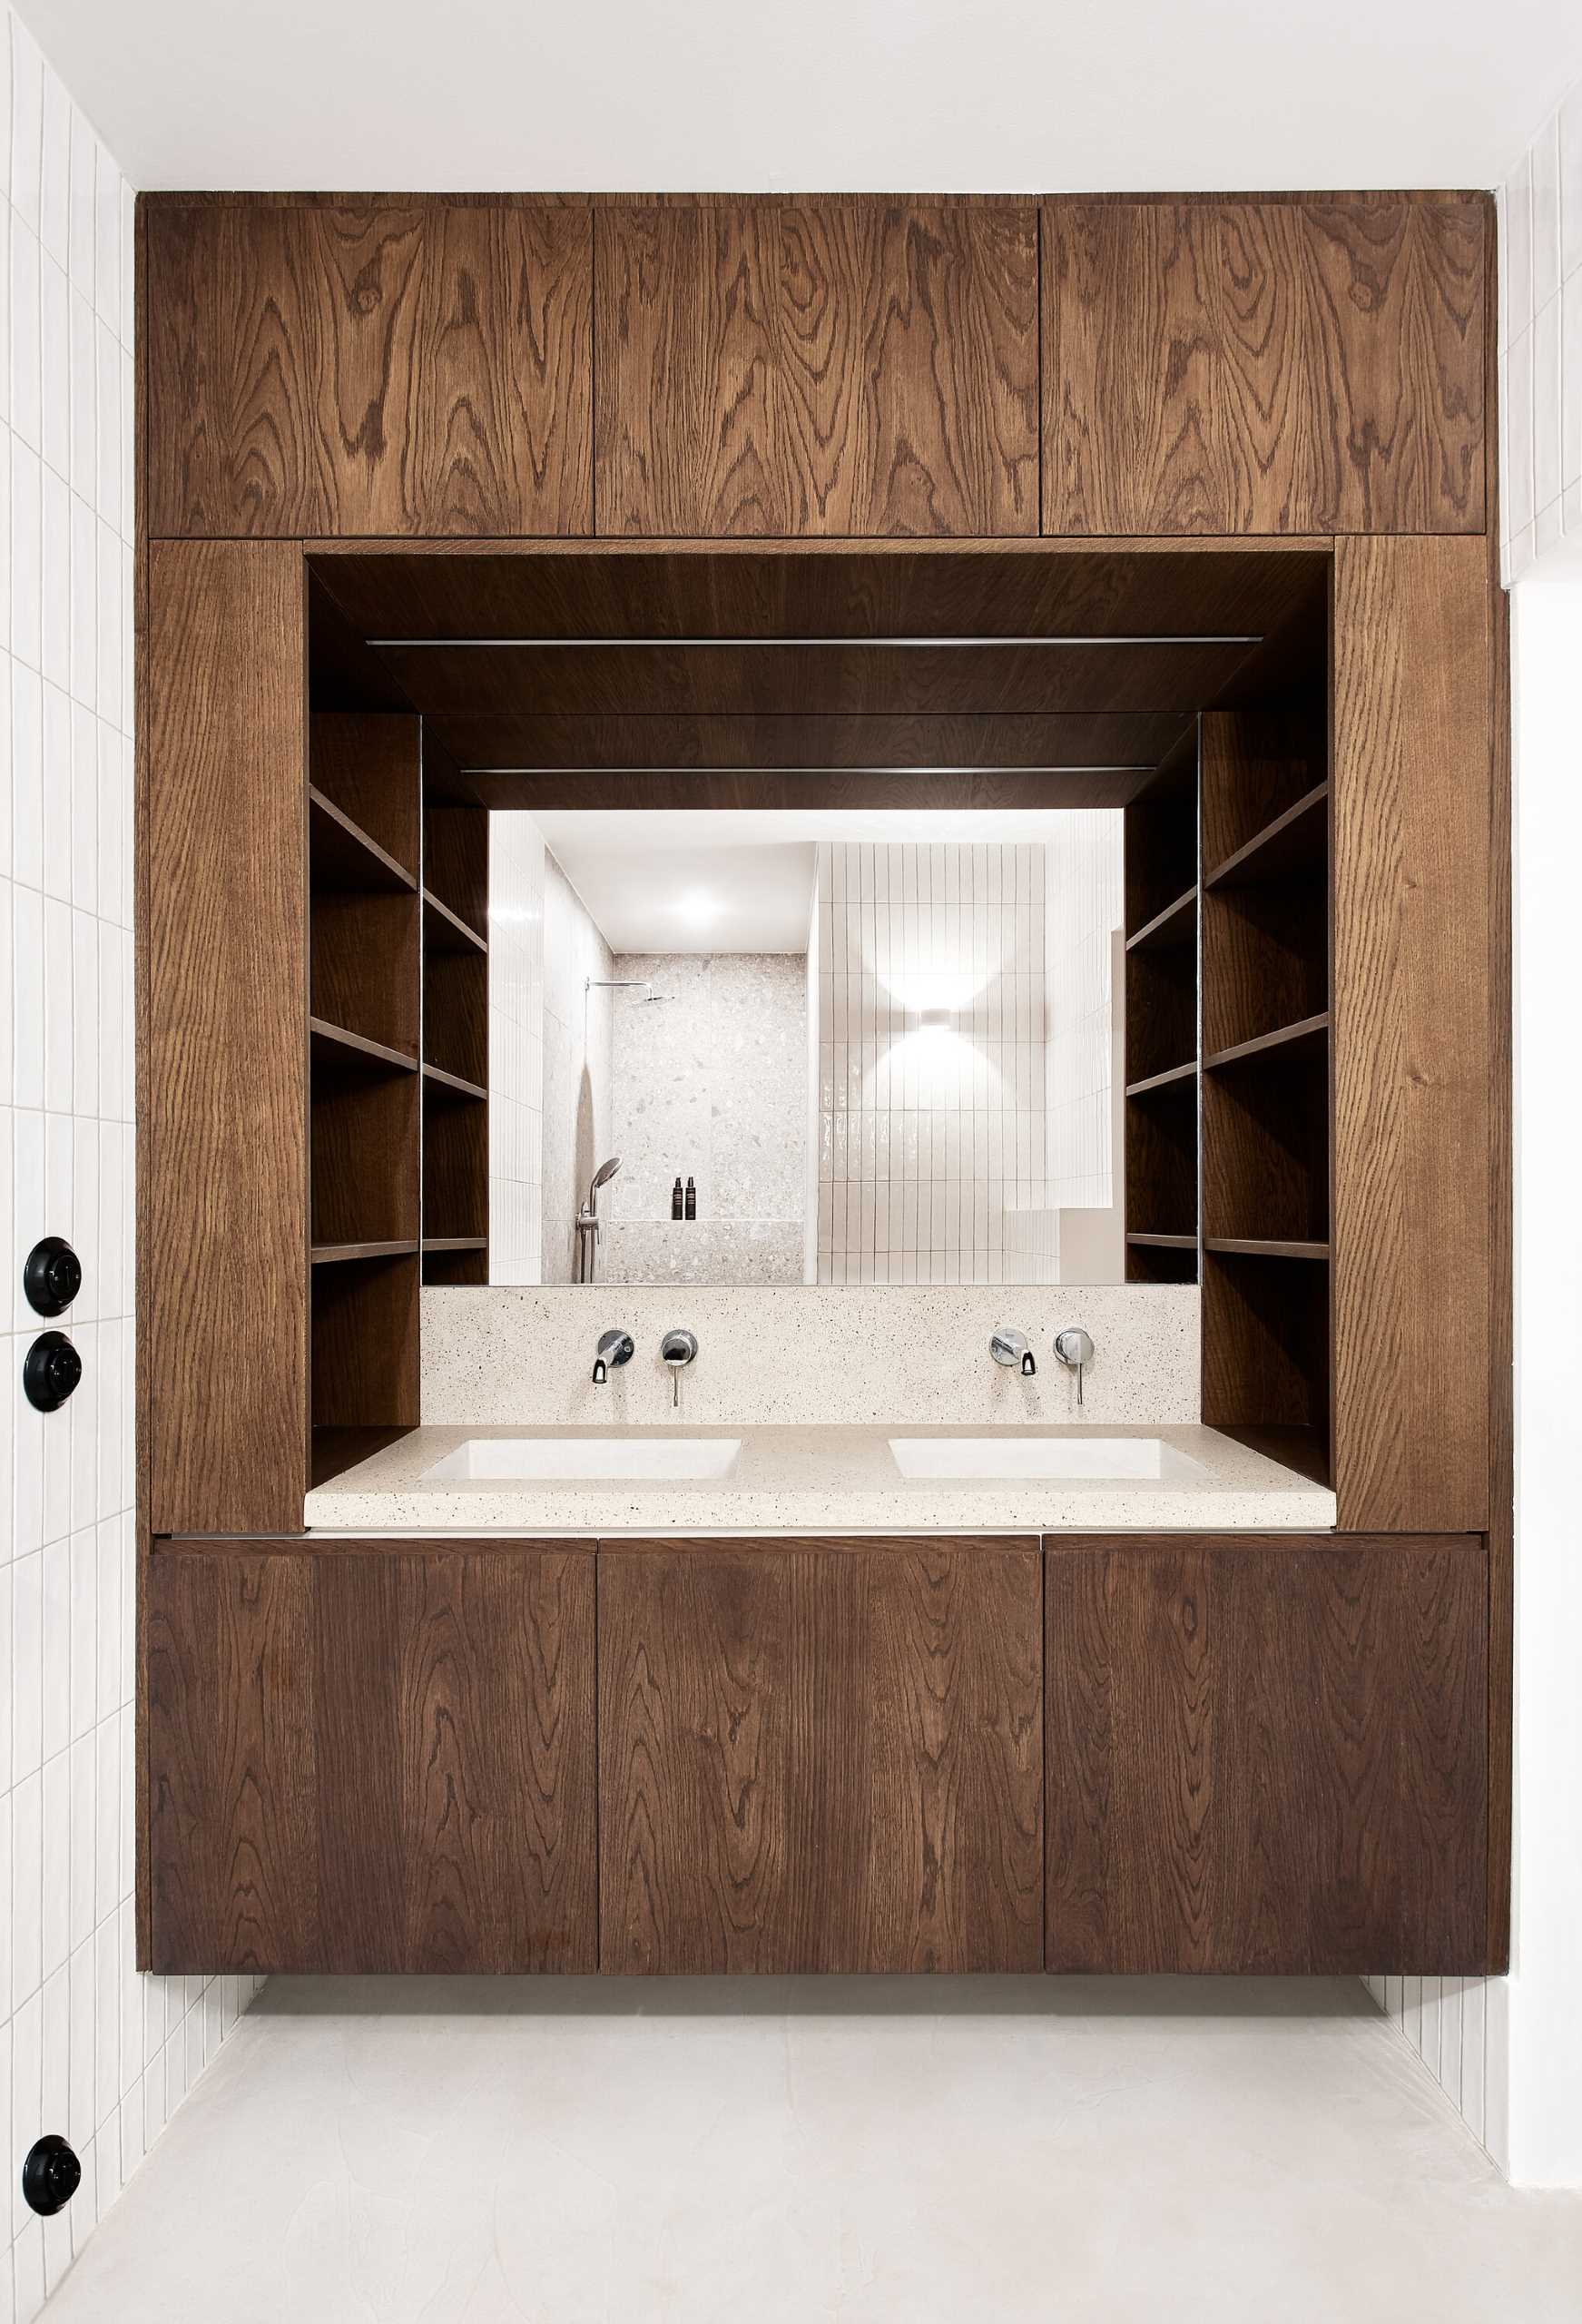 In this modern bathroom, wood cabinetry surrounds the vanity, while a concrete countertop includes built-in sinks, and white tiles line the wall.